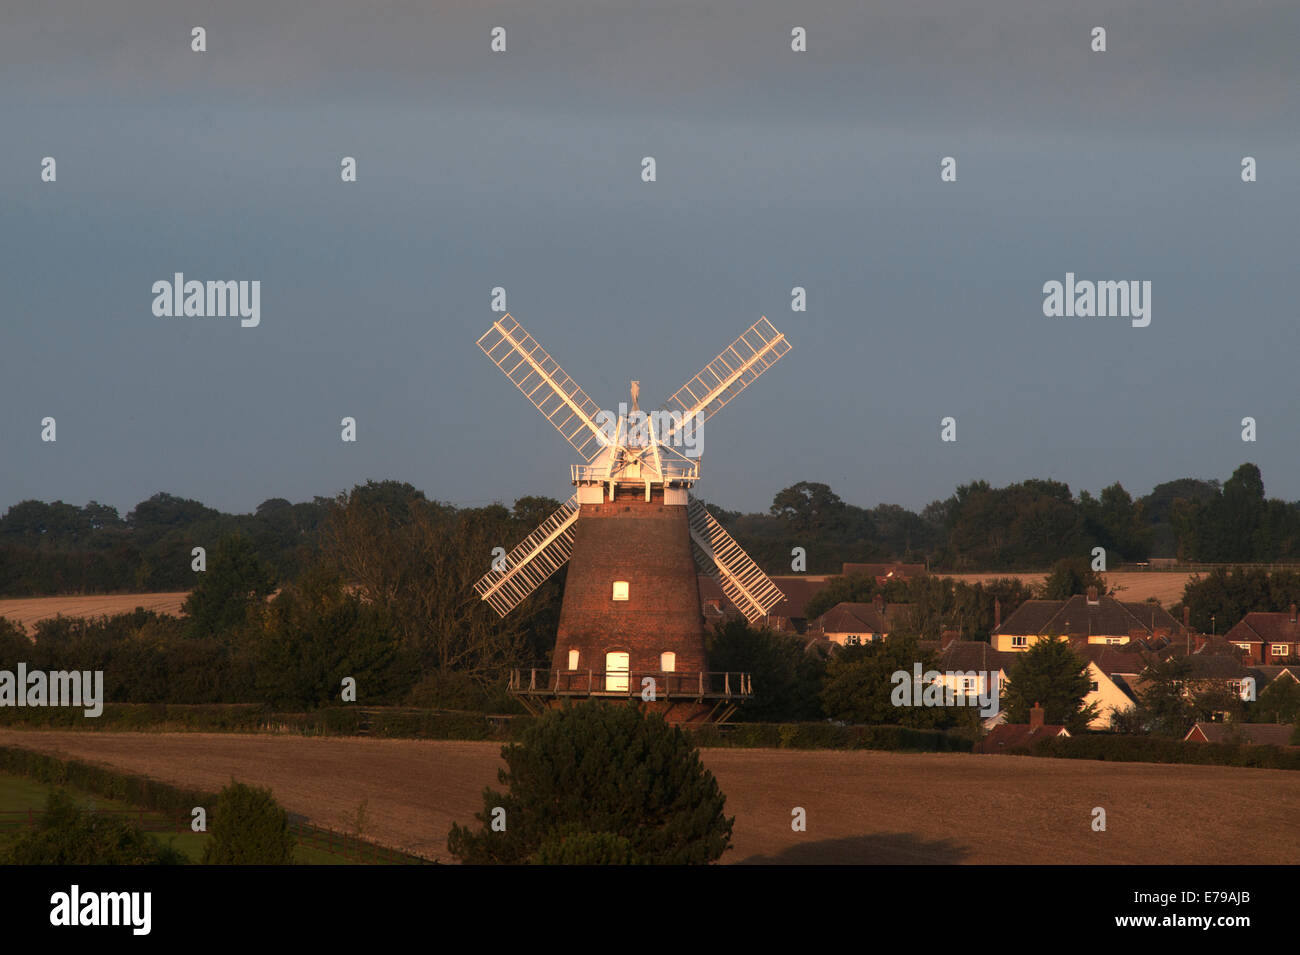 Thaxted  John Webb's Windmill, Thaxted, Essex,England. September 2014 Stock Photo